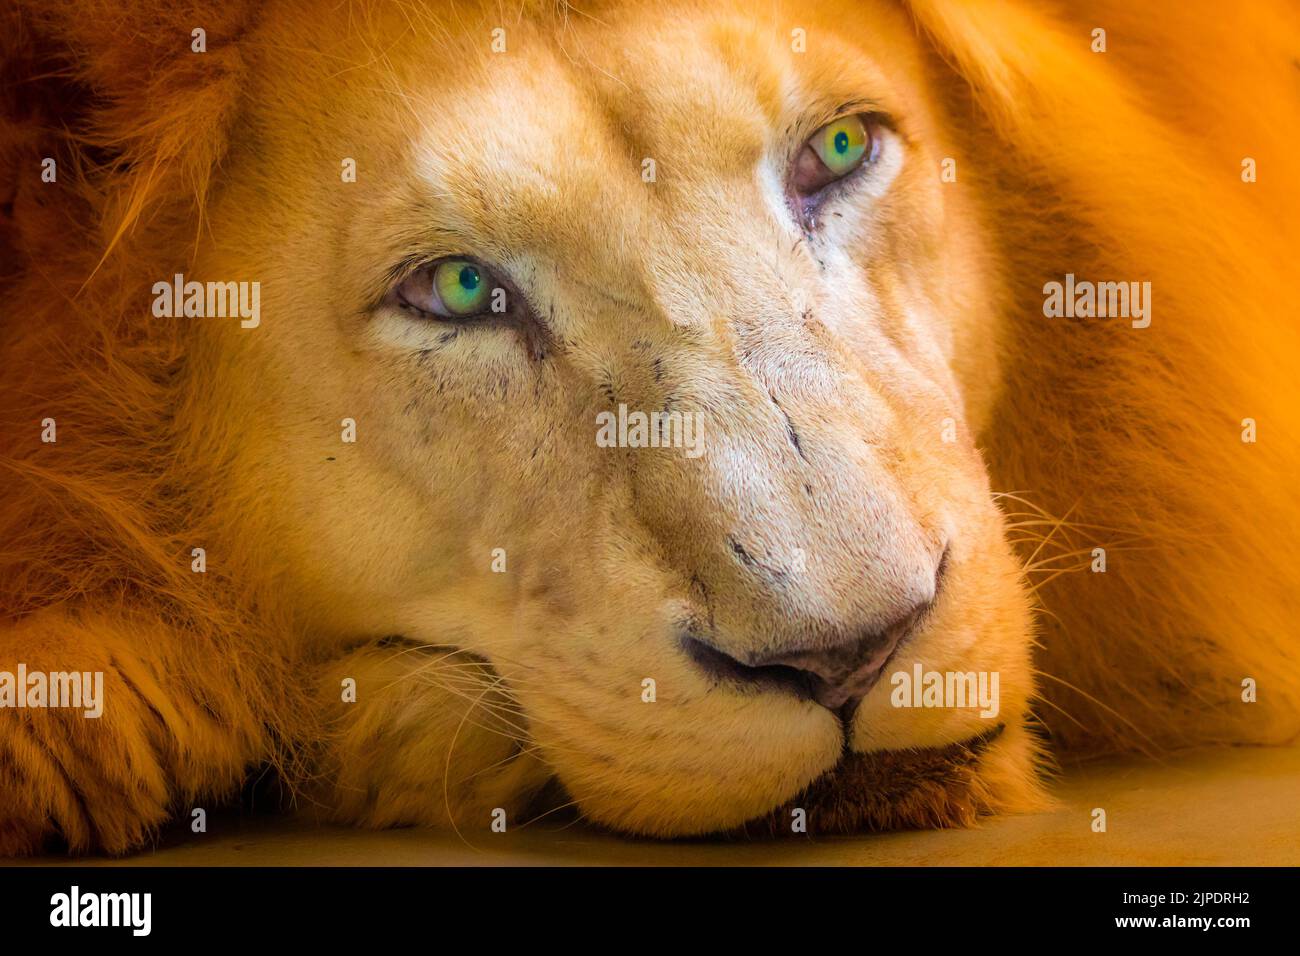 The lion (latin name Panthera leo krugeri) is resting on the wooden desk. Detail of animal head with beautiful eyes. Lion is naturally living in south Stock Photo